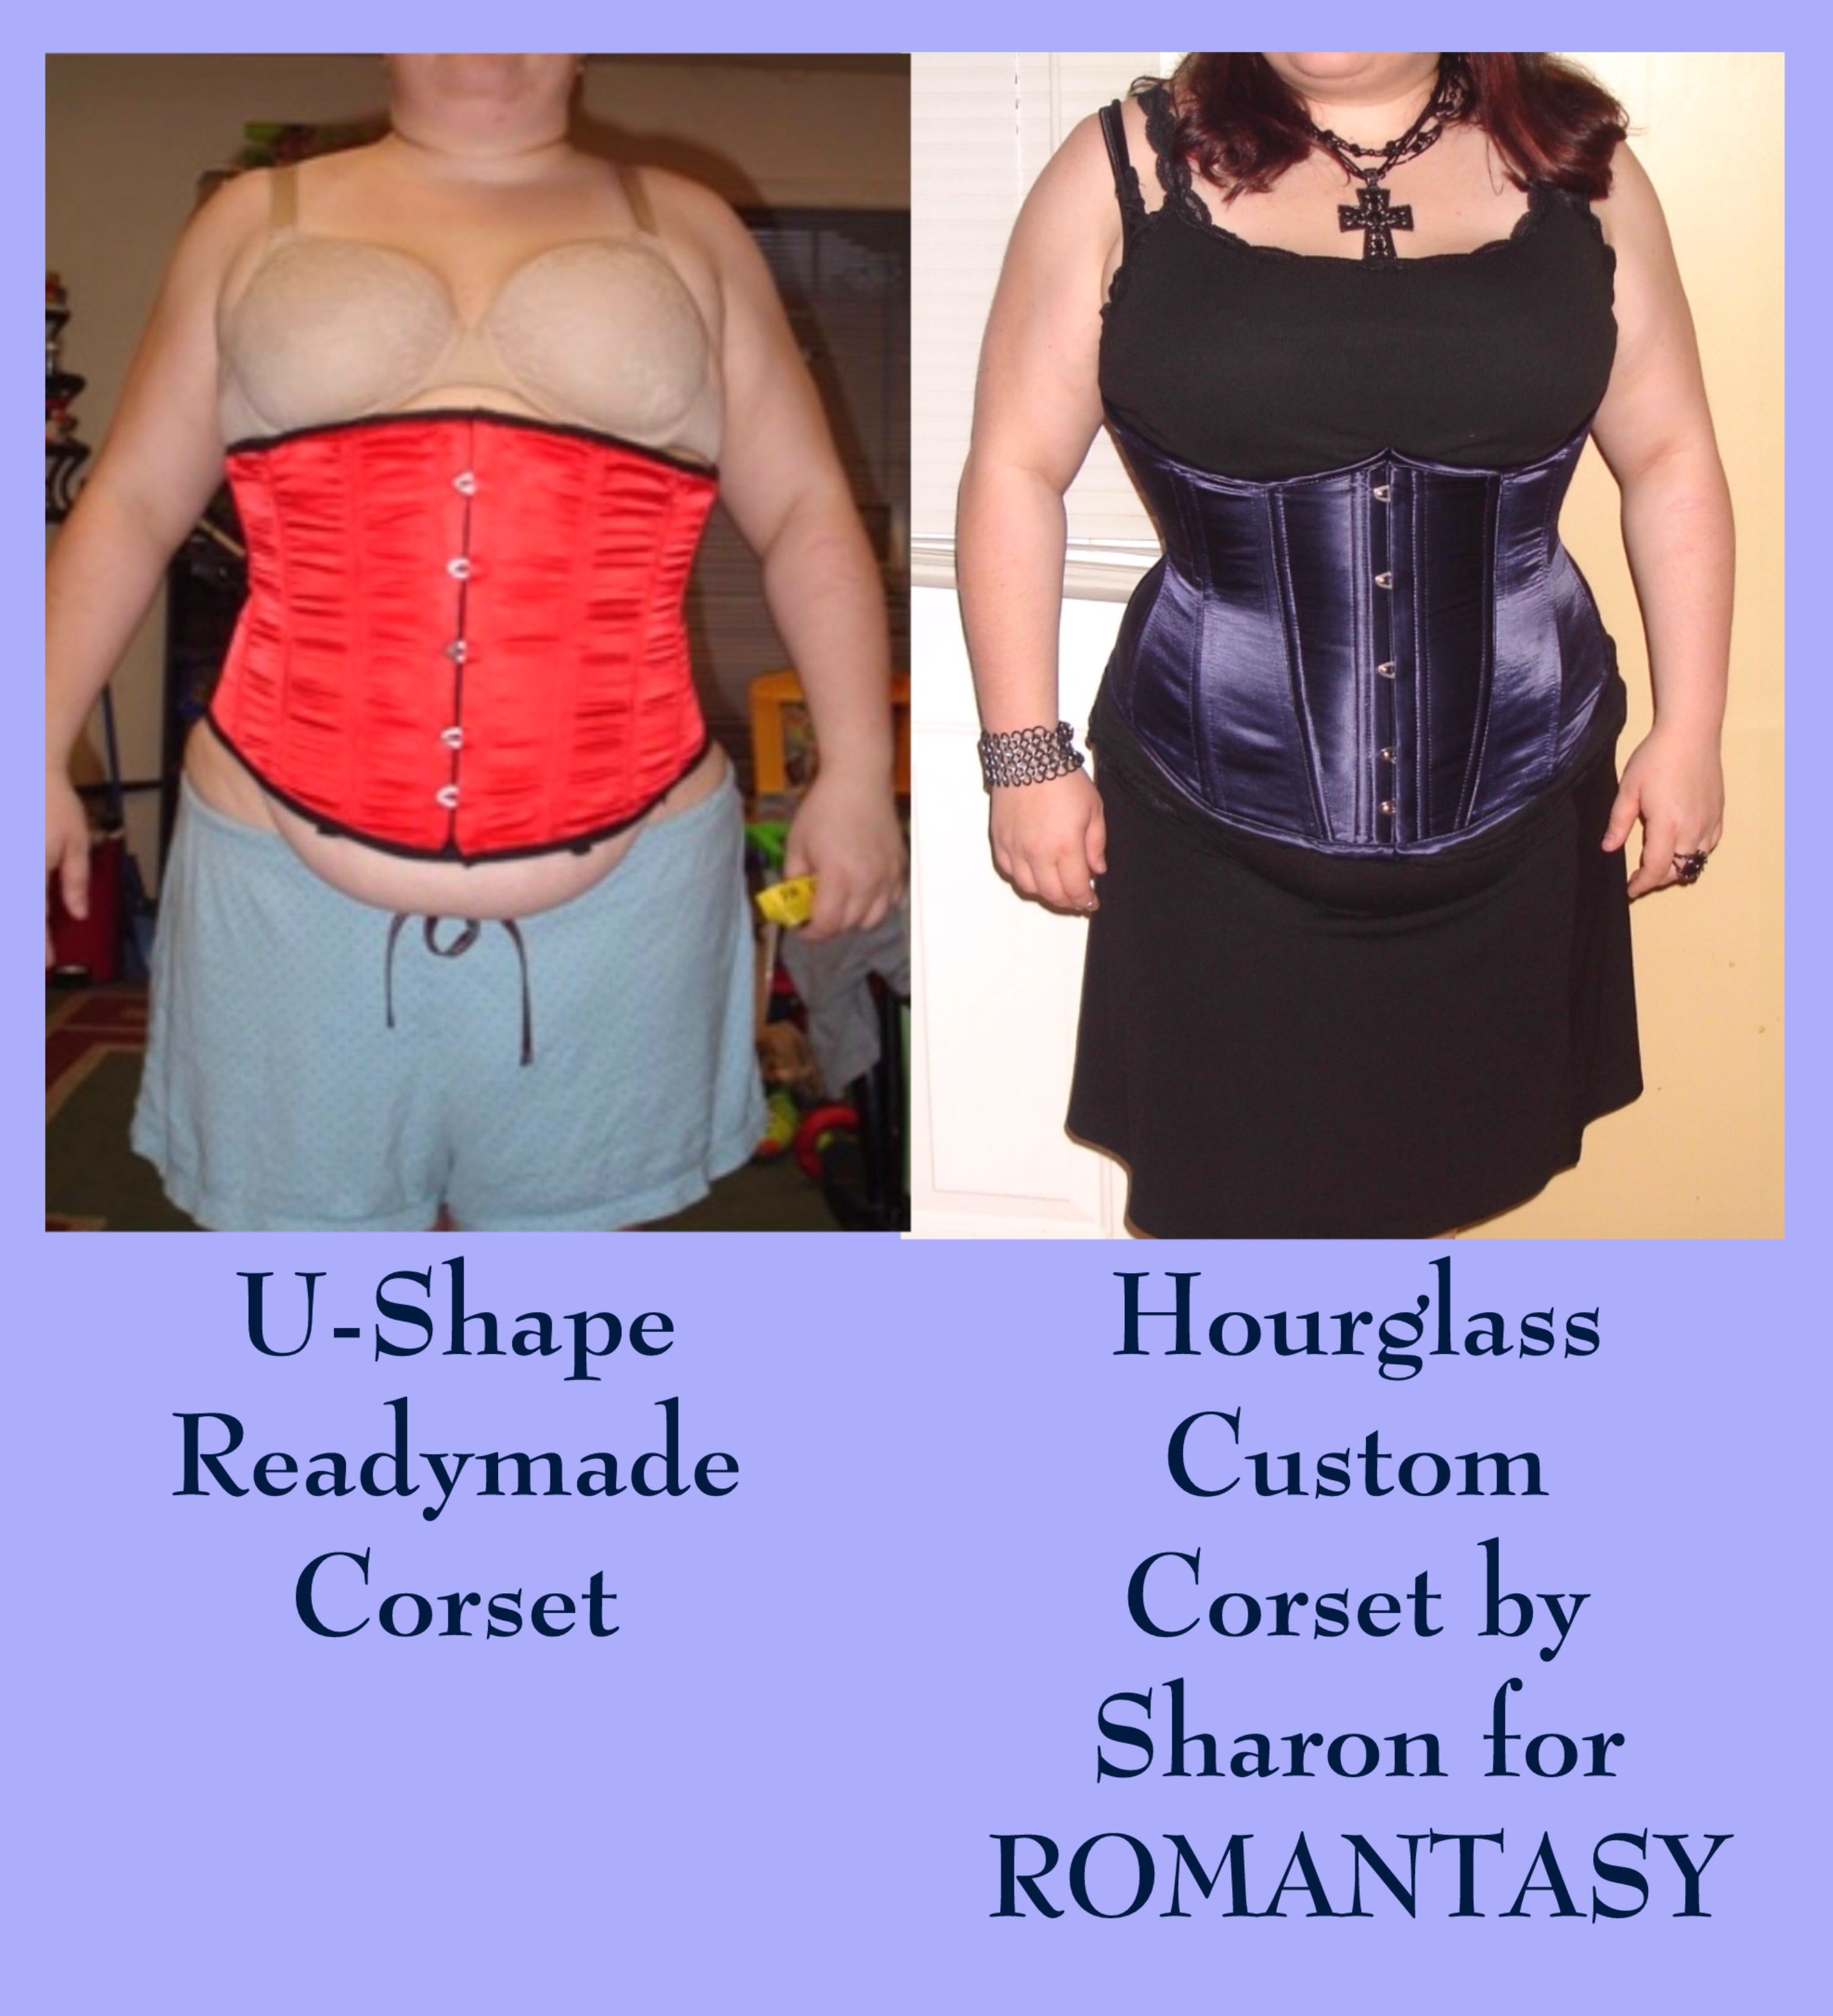 Corset Flaring & Gap Shapes: Fitting Issue or Not?